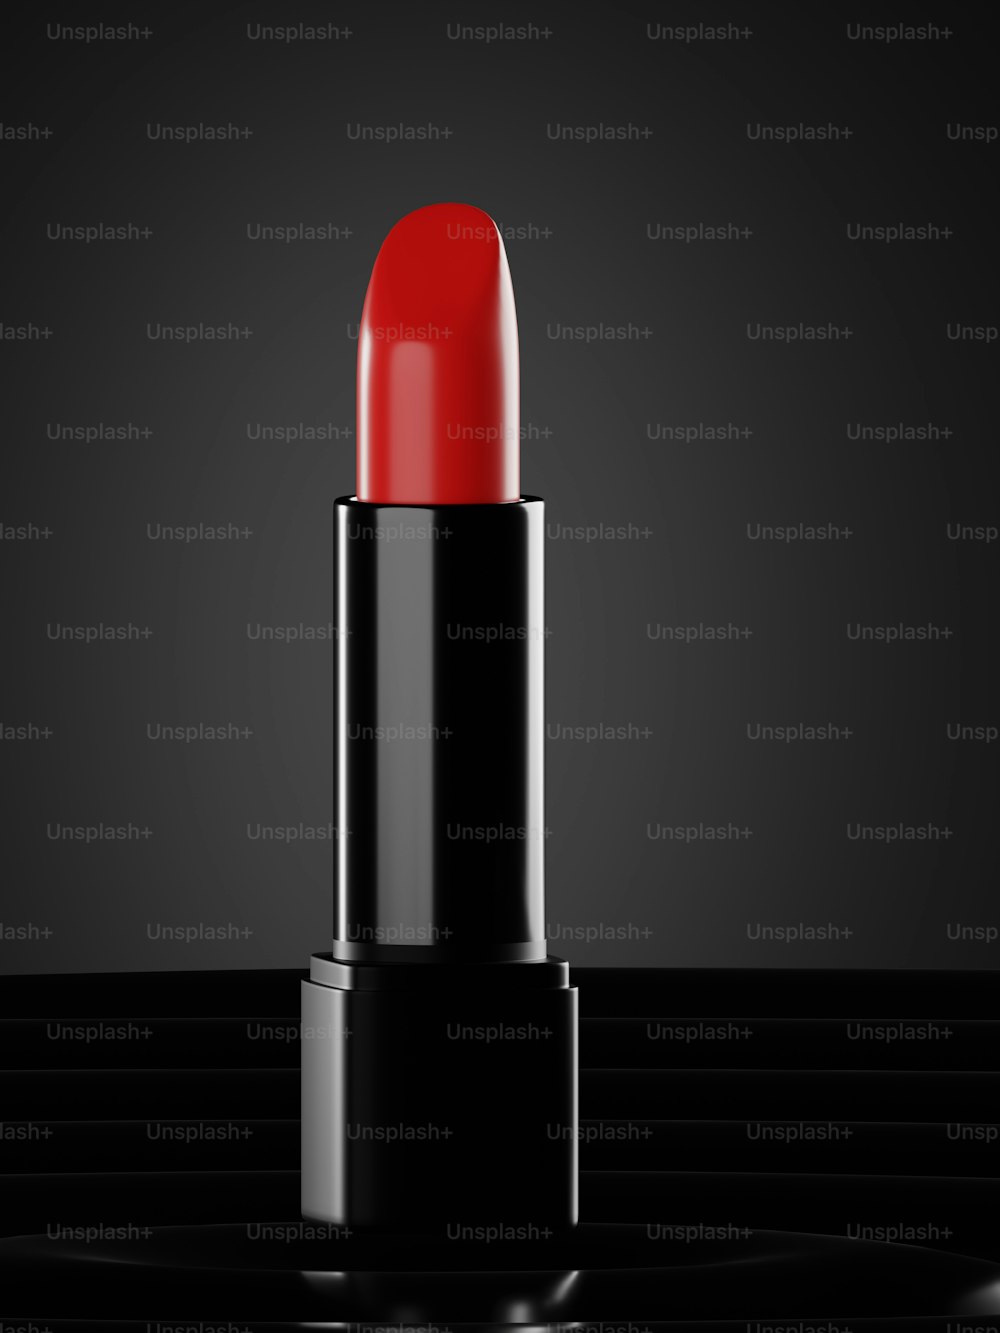 a red lipstick with a black background